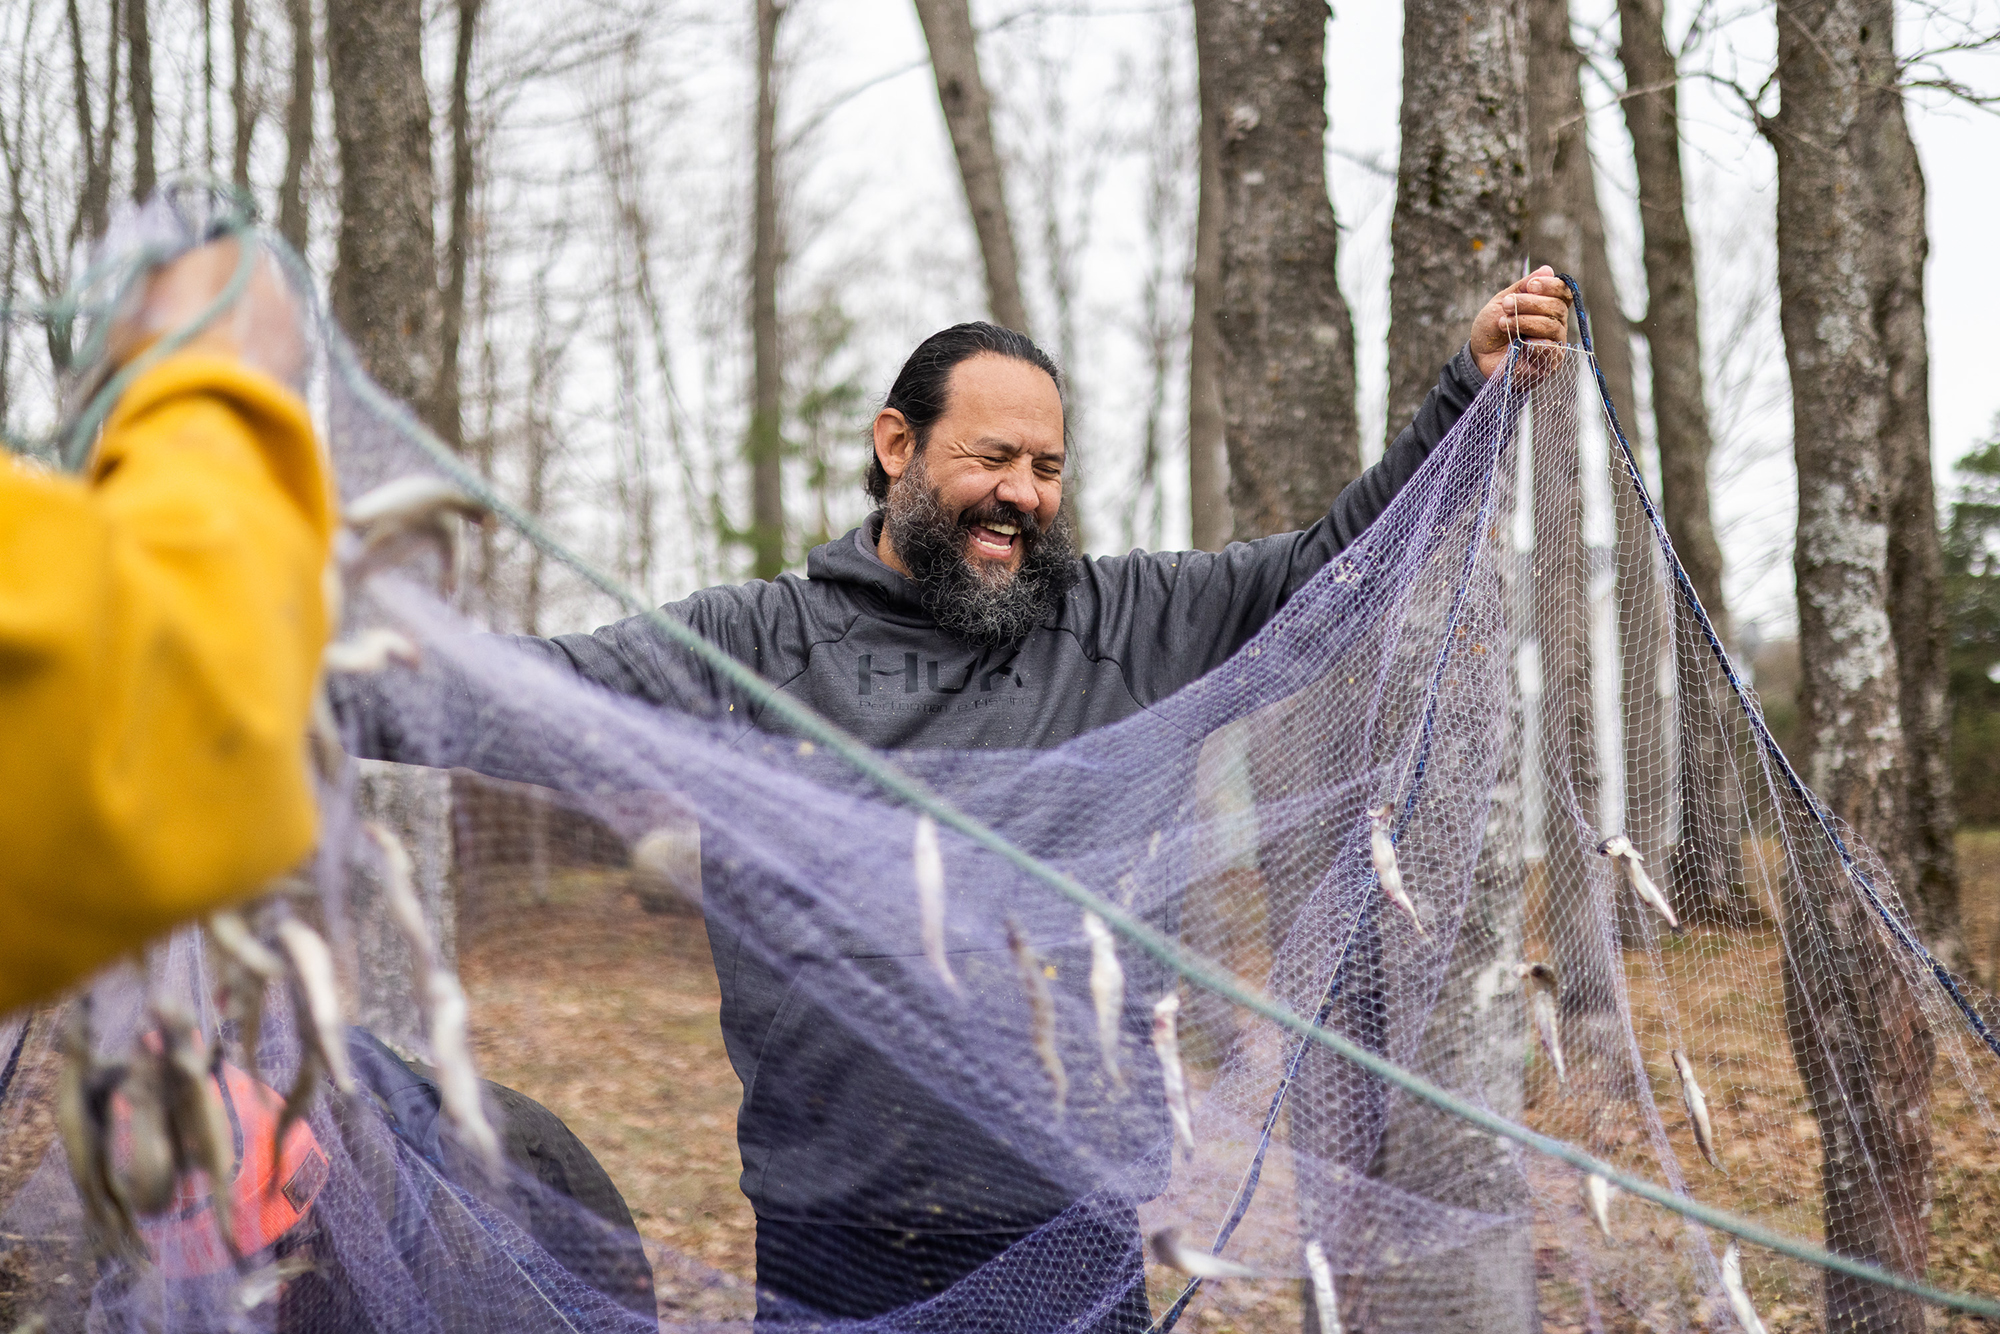 A man laughing as he holds up a fishing net.